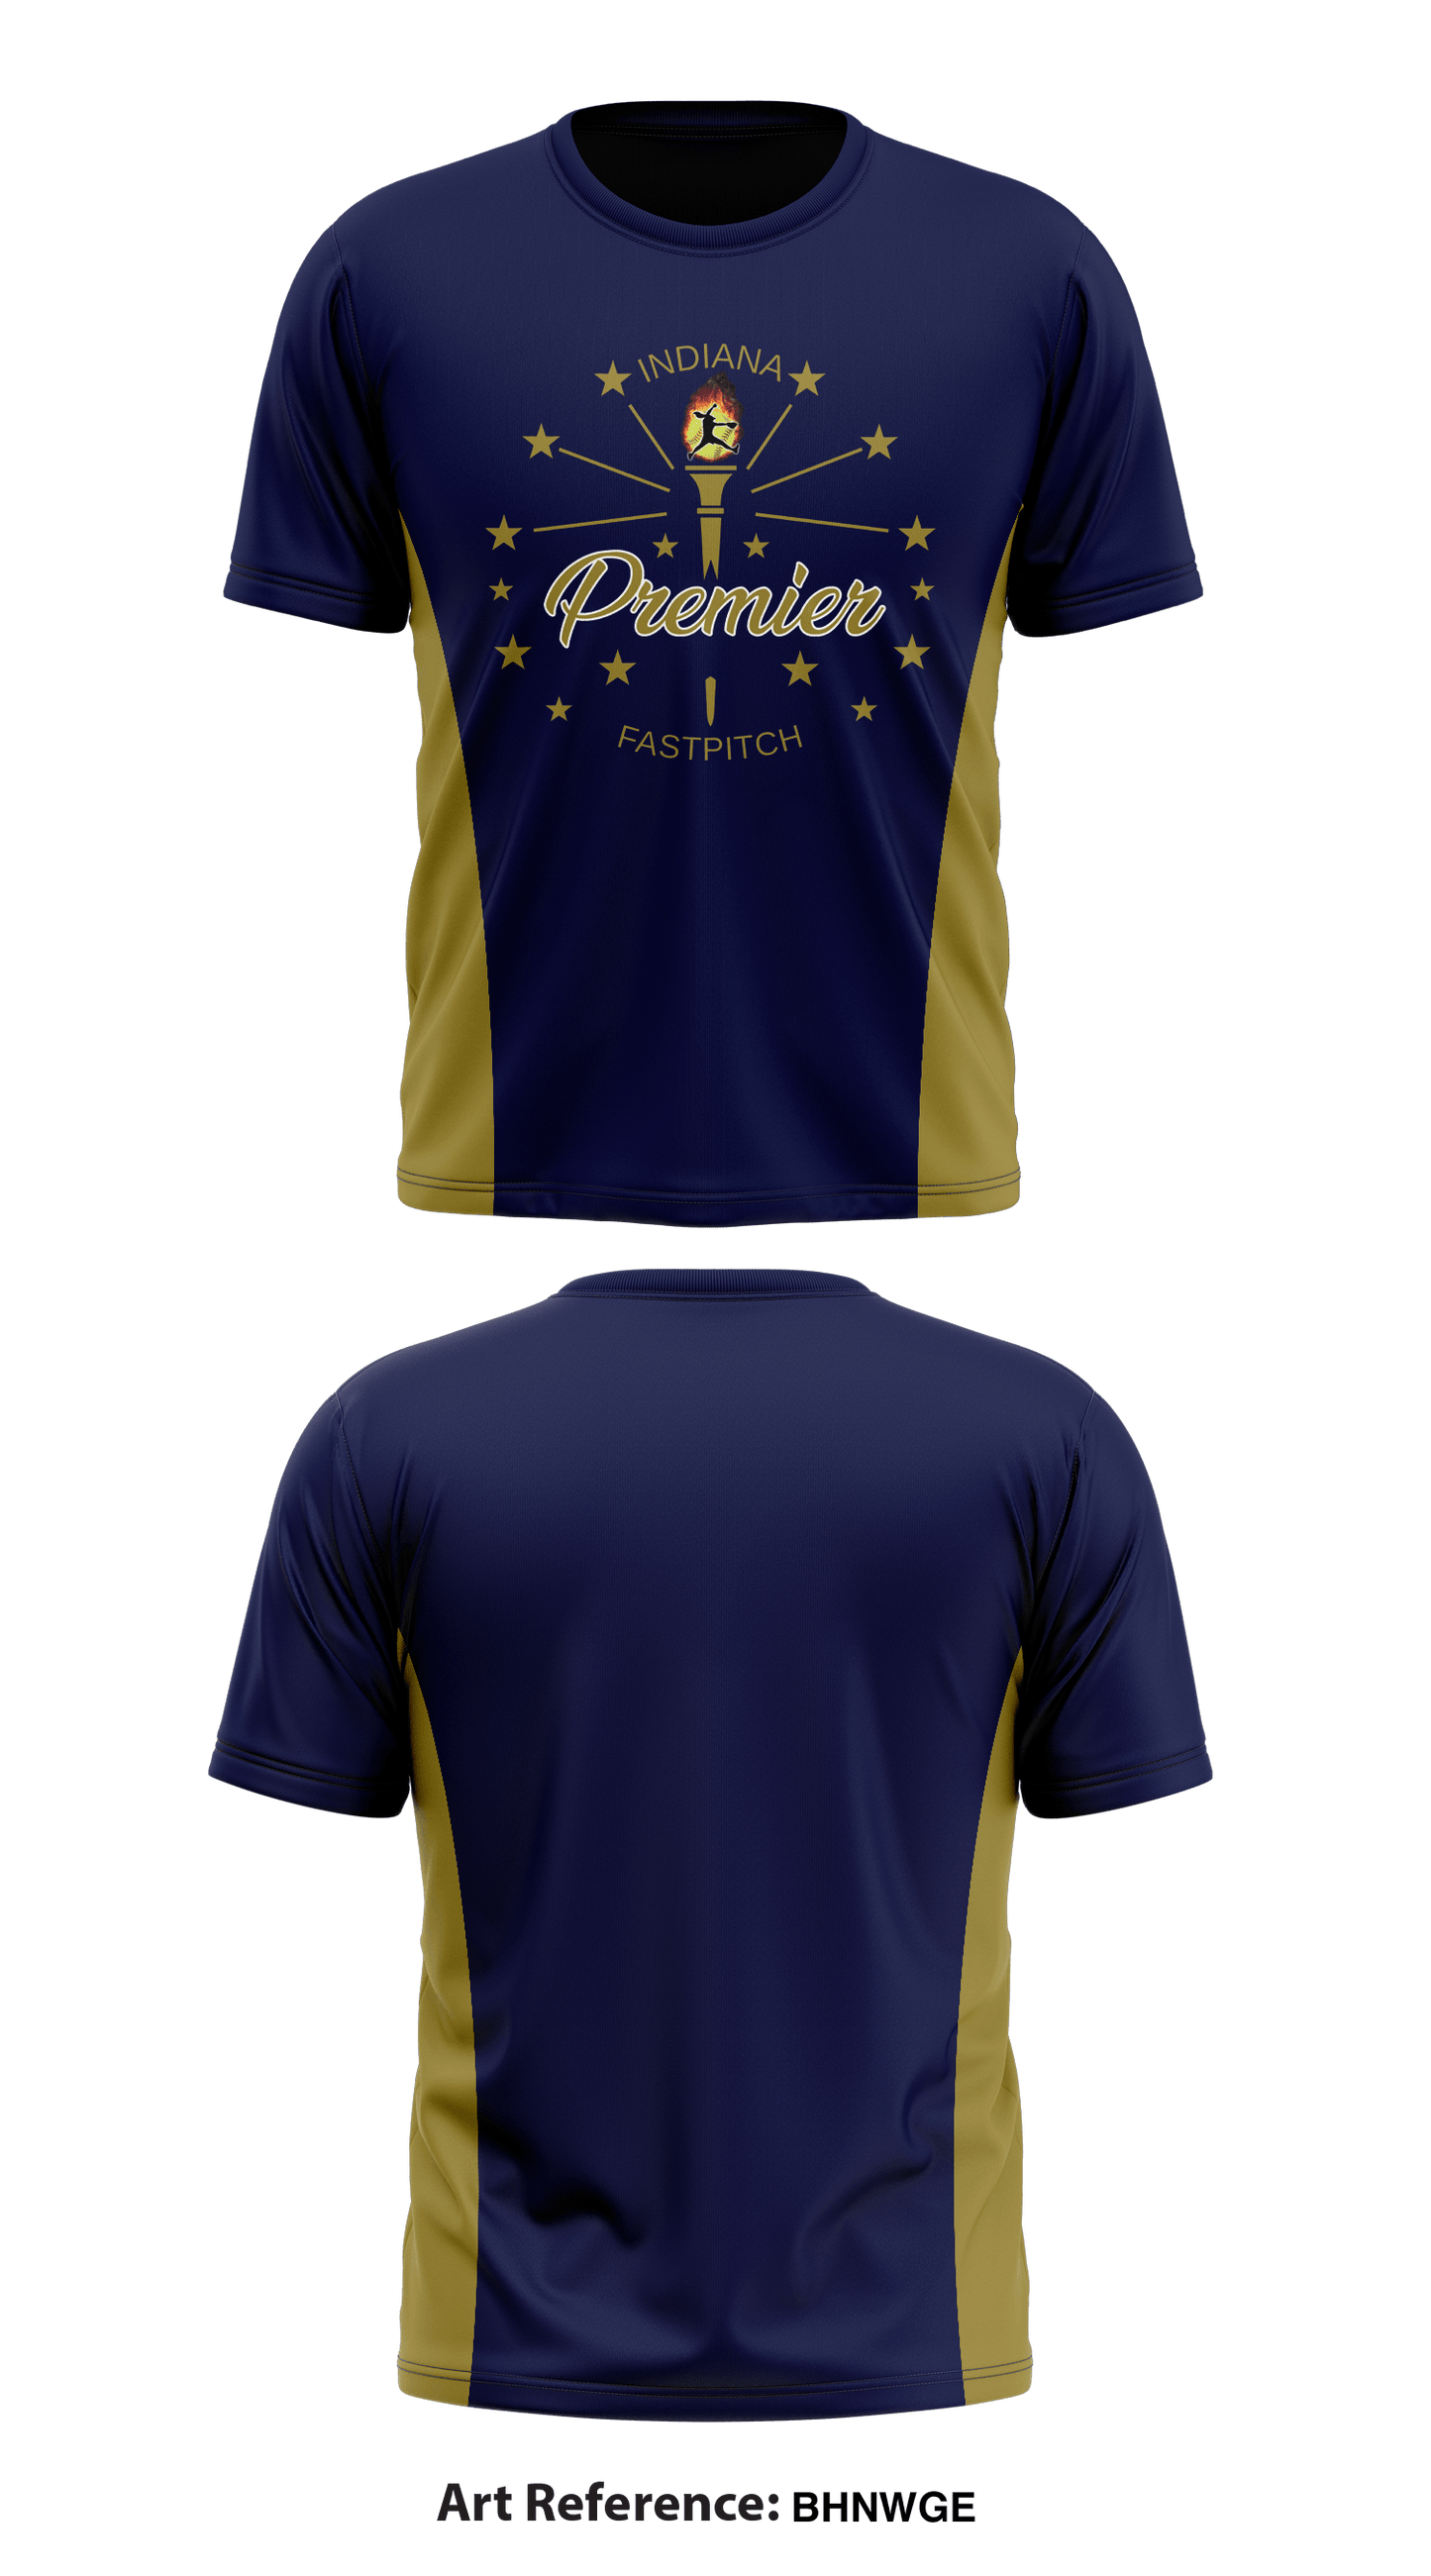 IndianaPremier Fastpitch Store 1 Core Men's SS Performance Tee - BHnwge